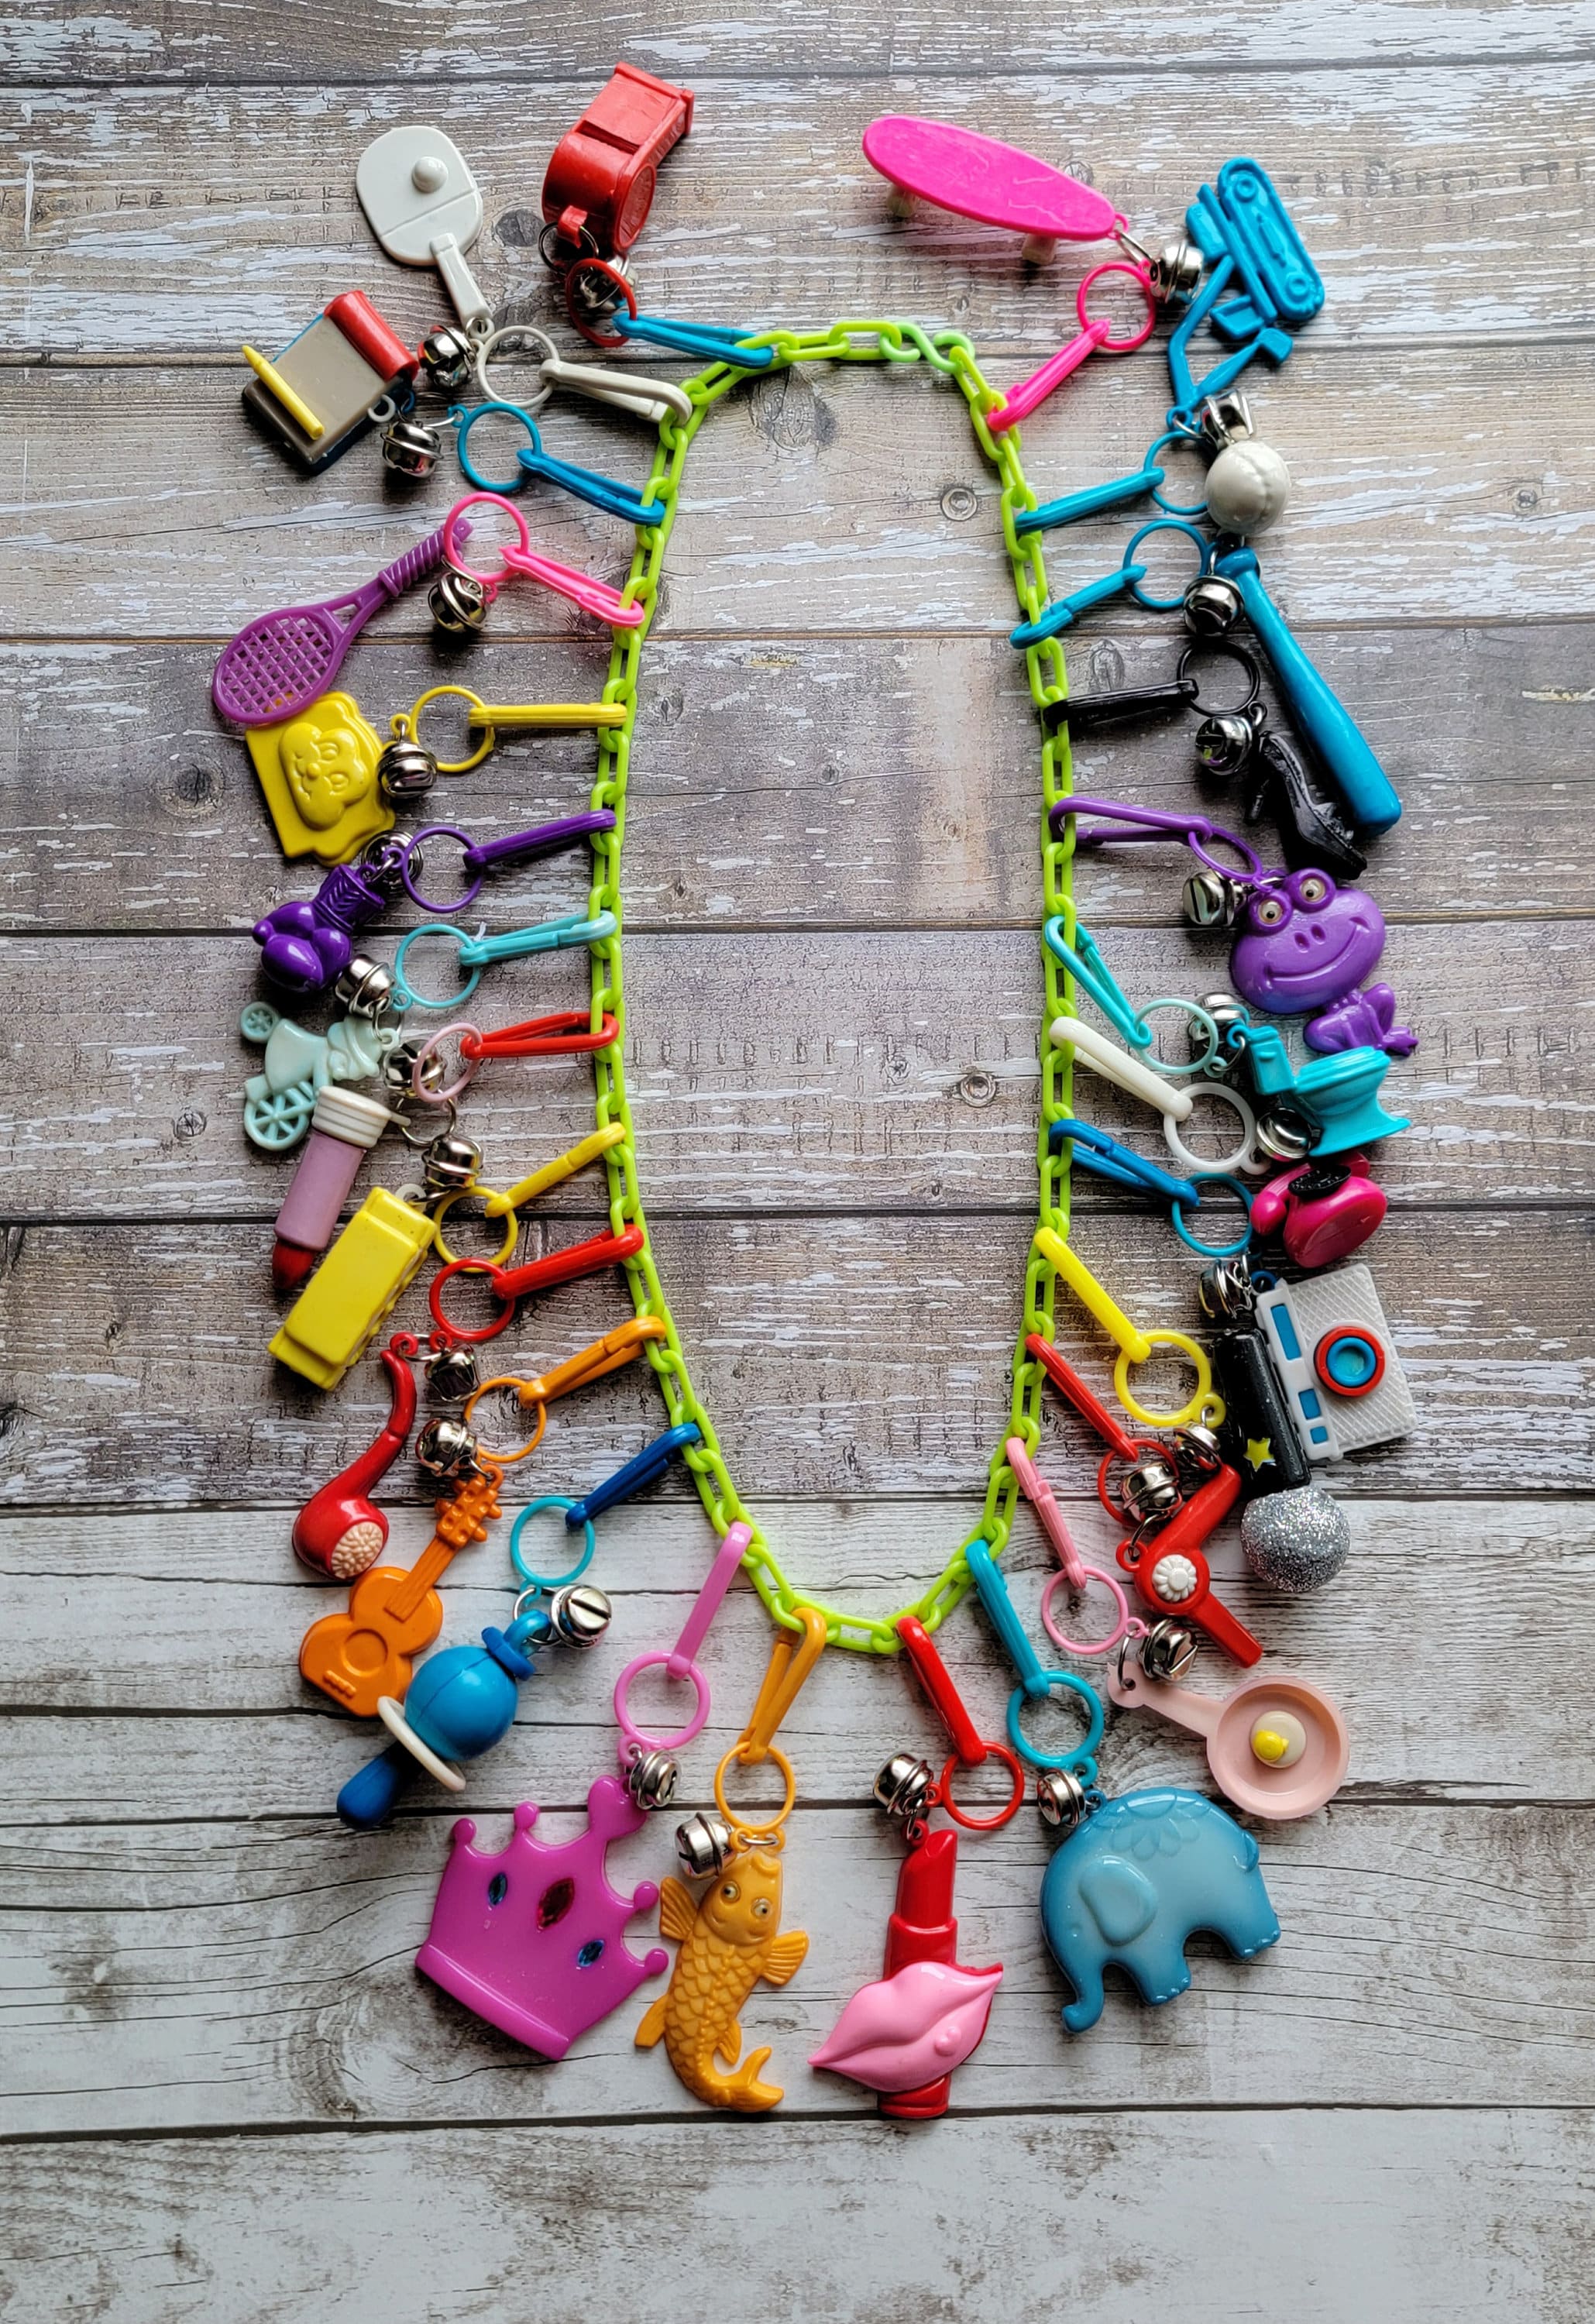 Who had the plastic charm necklaces from the 80's? — The Bump